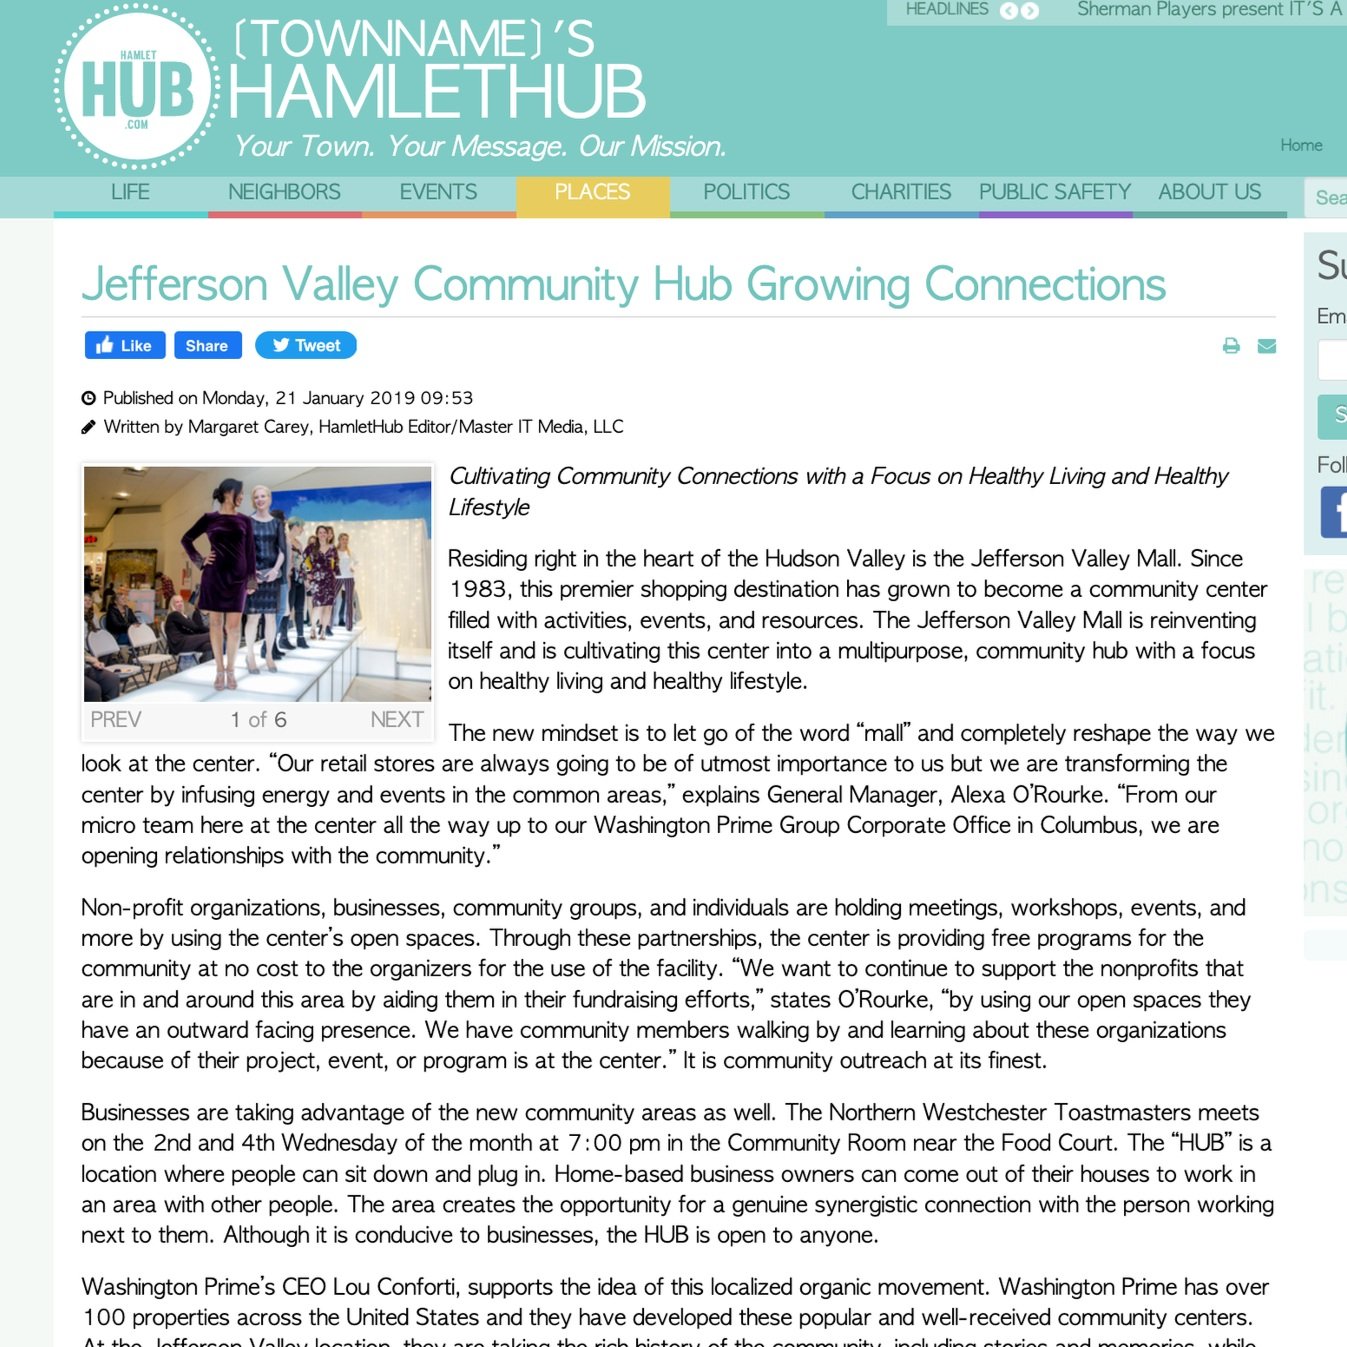 Jefferson Valley Community Hub Growing Connections: Cultivating Community Connections with a Focus on Healthy Living and Healthy Lifestyle (Copy)